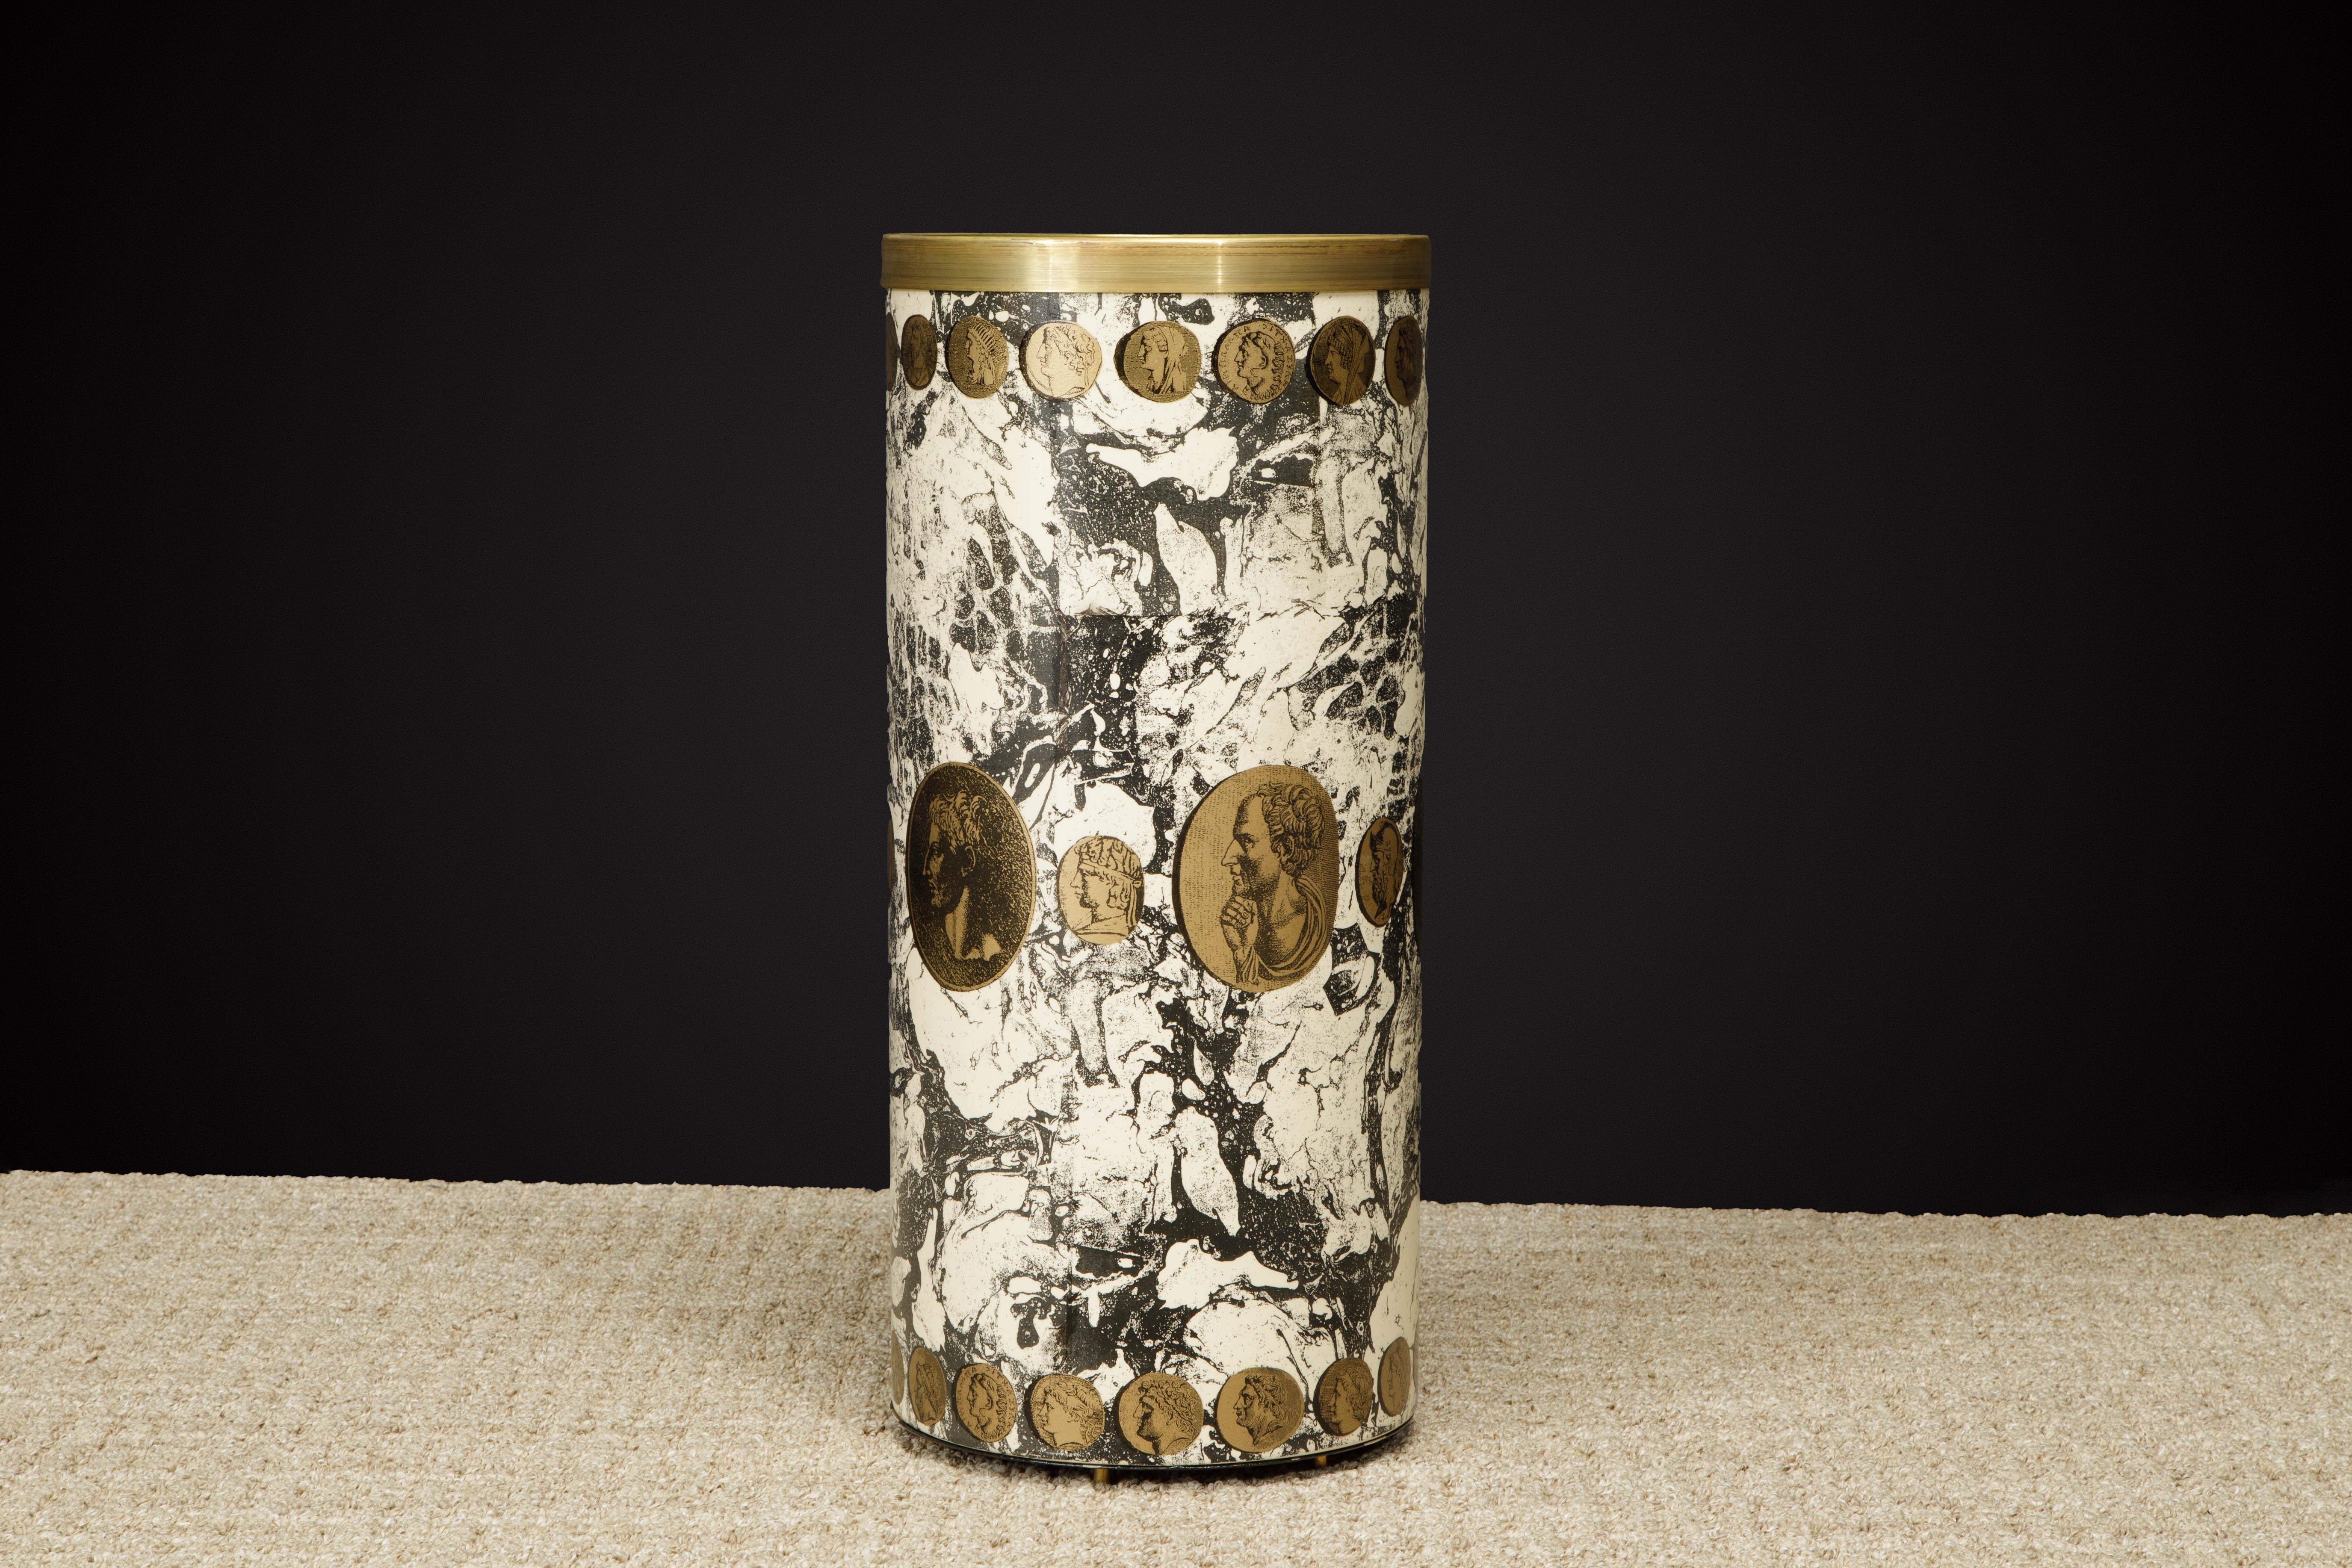 This collectors item is the 'Cammei Marbalia' (Marbled Cameos in Italian) umbrella stand by Piero Fornasetti, circa 1970s, signed underneath. This hefty round umbrella bin is made with lithographic transfer and lacquered metal that has a white and